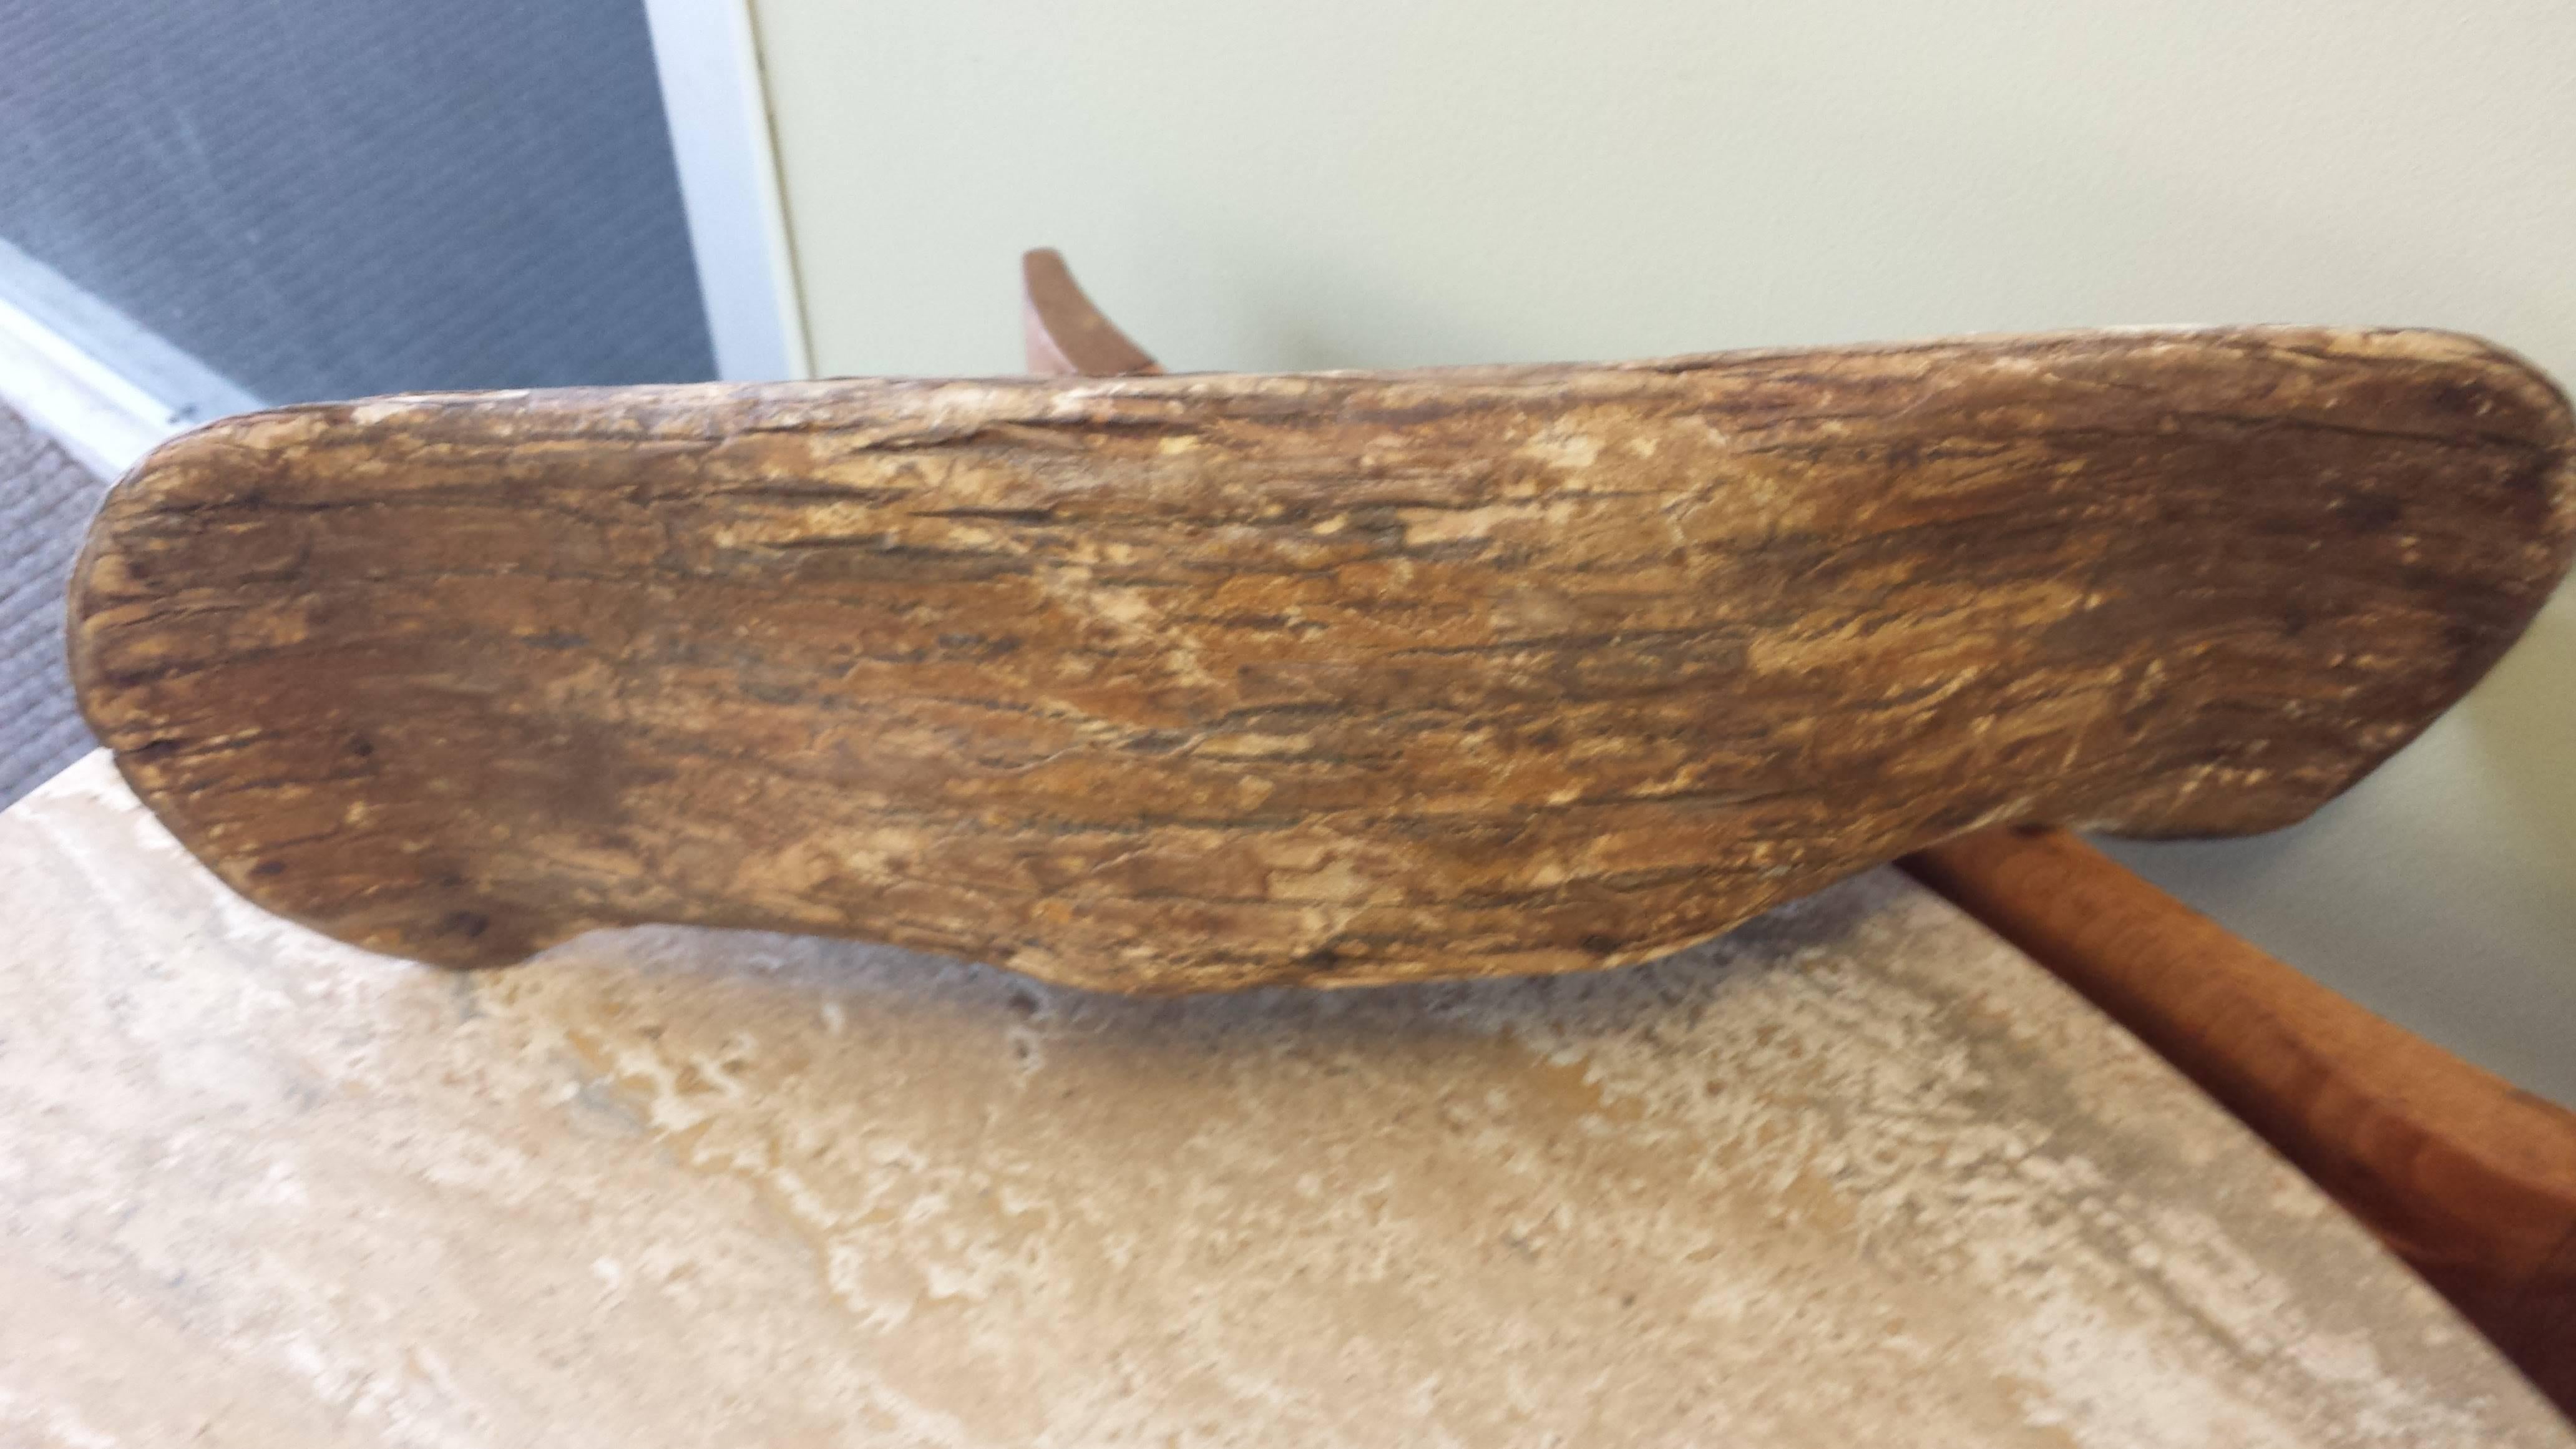 20th Century Bark Canoe Salesman's Sample or Native Model Made from One-Piece of Bark